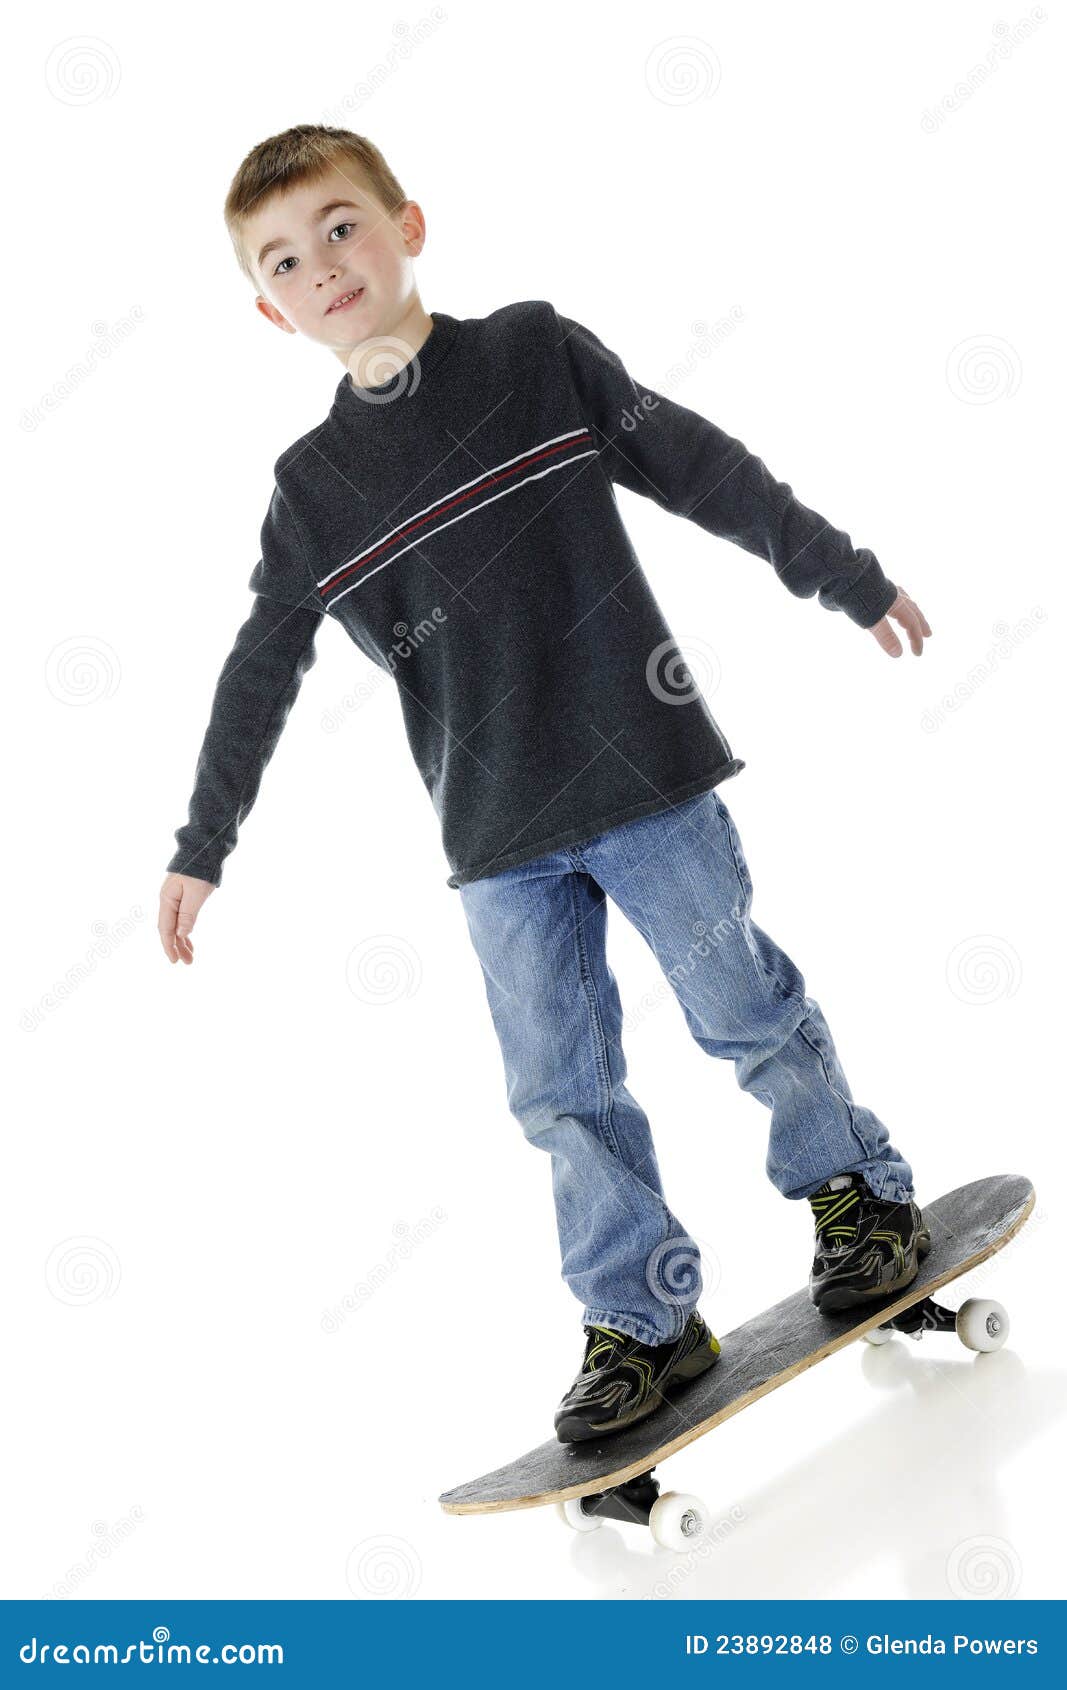 Young Skateboarder stock photo. Image of male, downhill - 23892848